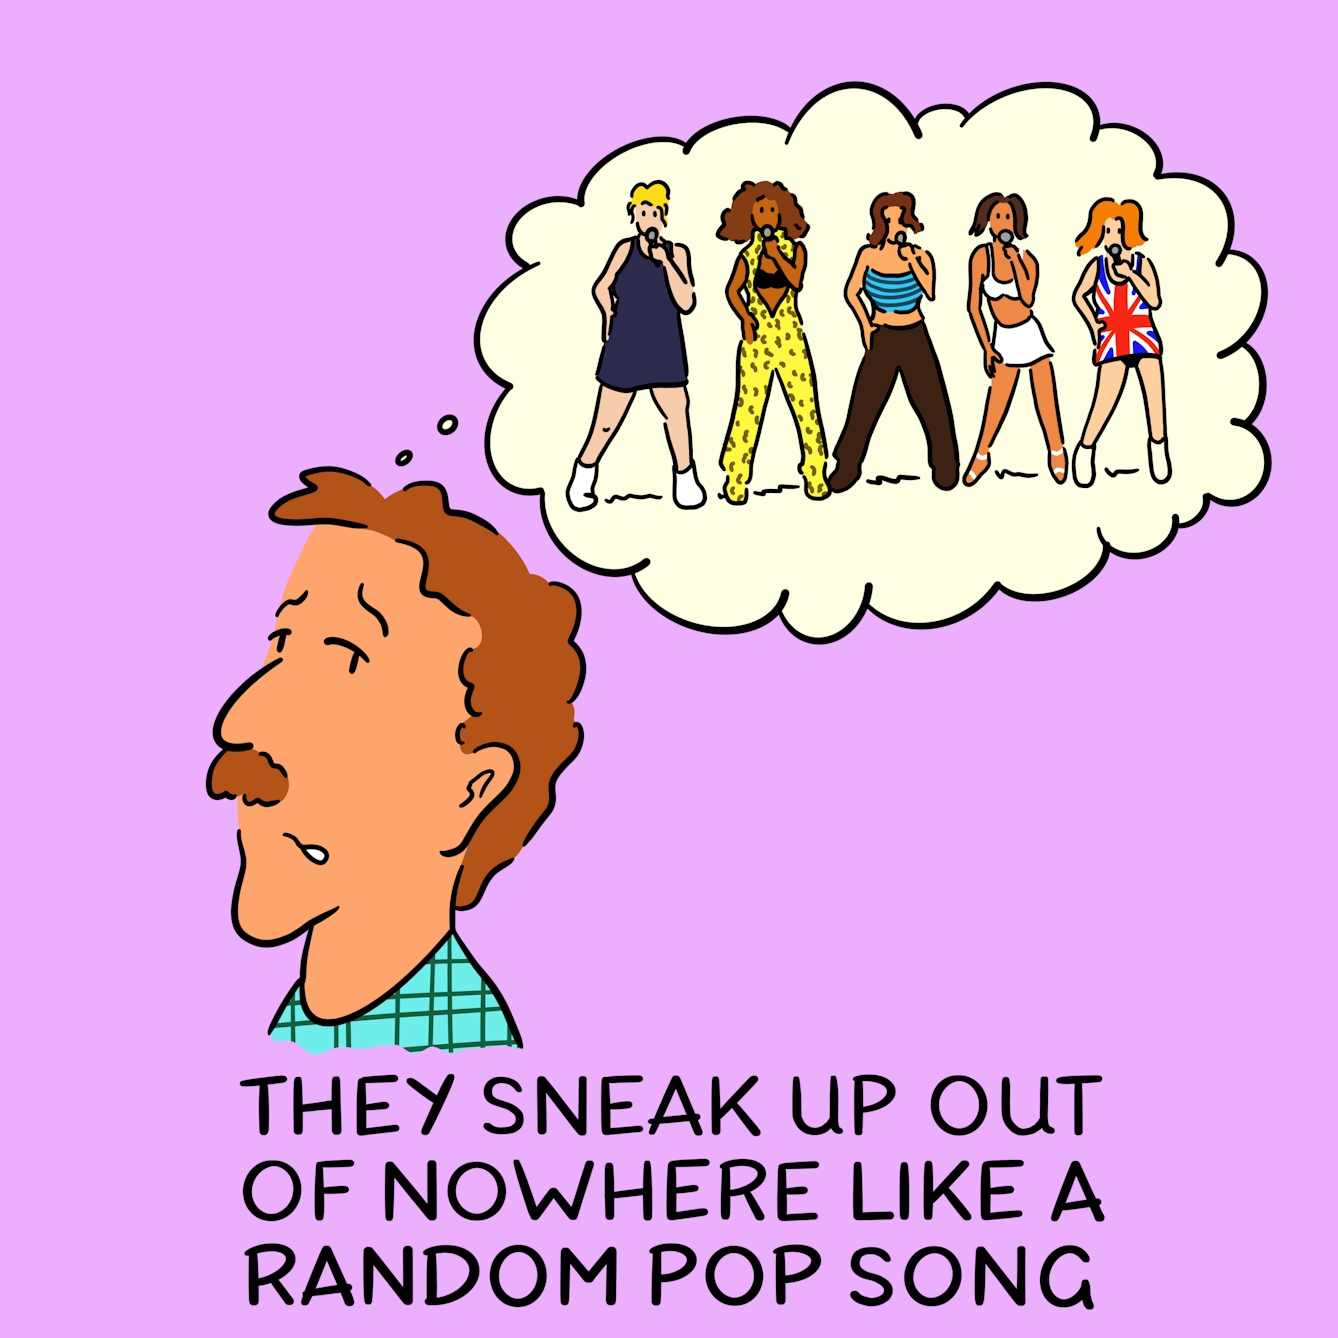 Panel 3 of a four-panel comic drawn digitally: a white man with a moustache in a plaid shirt has a thought bubble rising from his head with images of the Spice Girls in iconic outfits such as the Union Jack dress and leopard-print jumpsuit. The caption text reads "They sneak up out of nowhere like a random pop song"